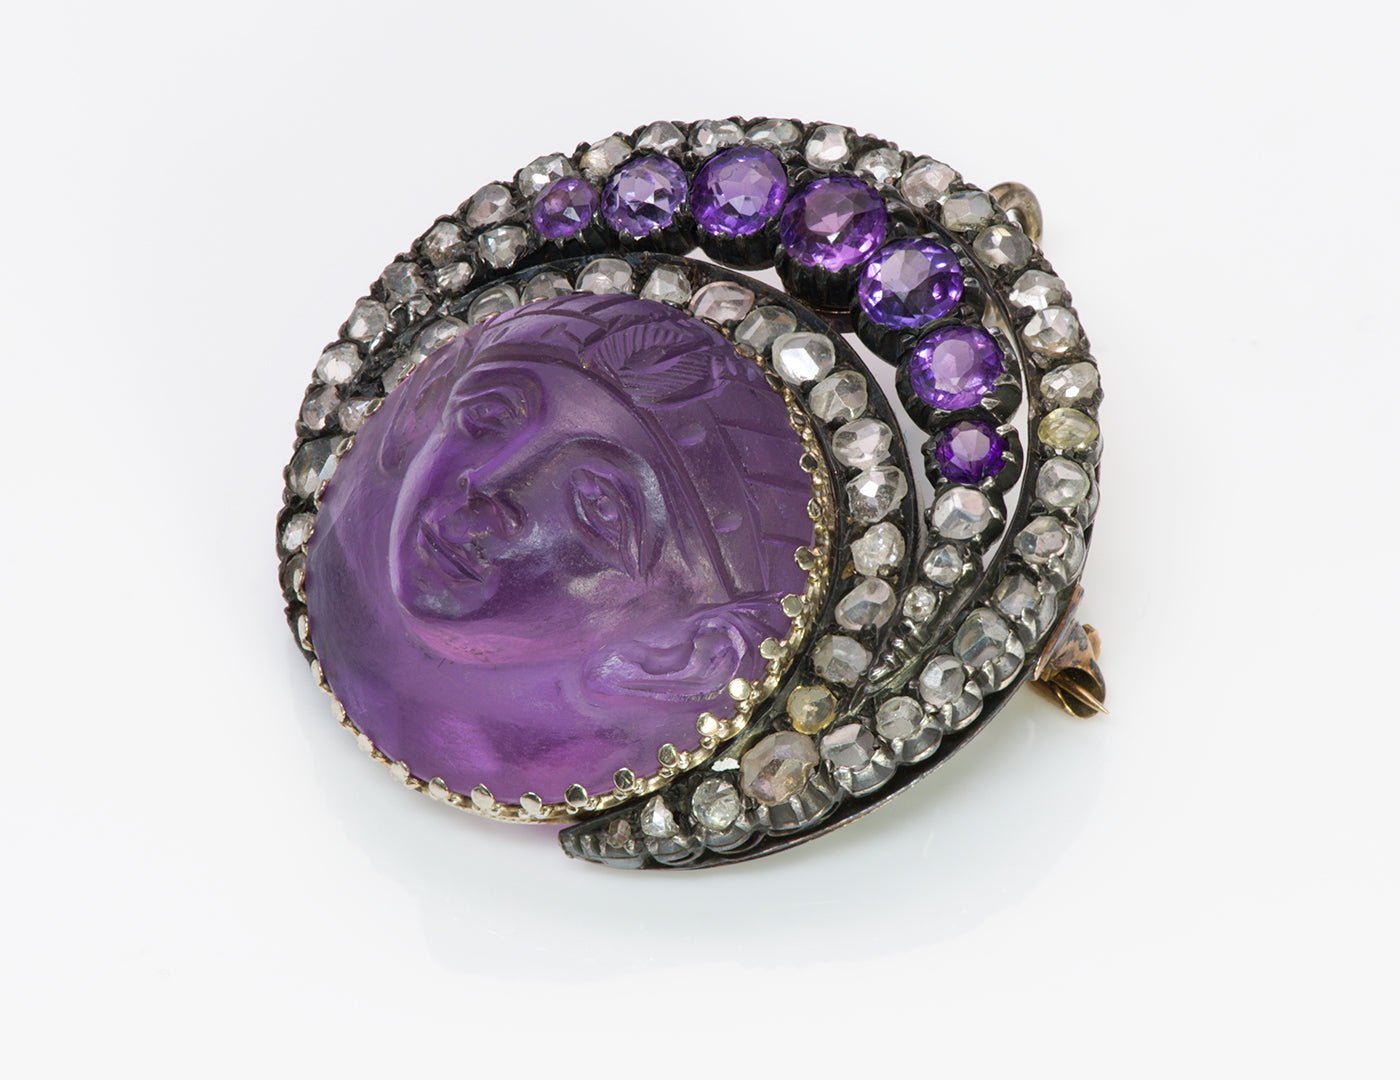 Antique Egyptian Revival Carved Amethyst Diamond Pendant Brooch - DSF Antique Jewelry